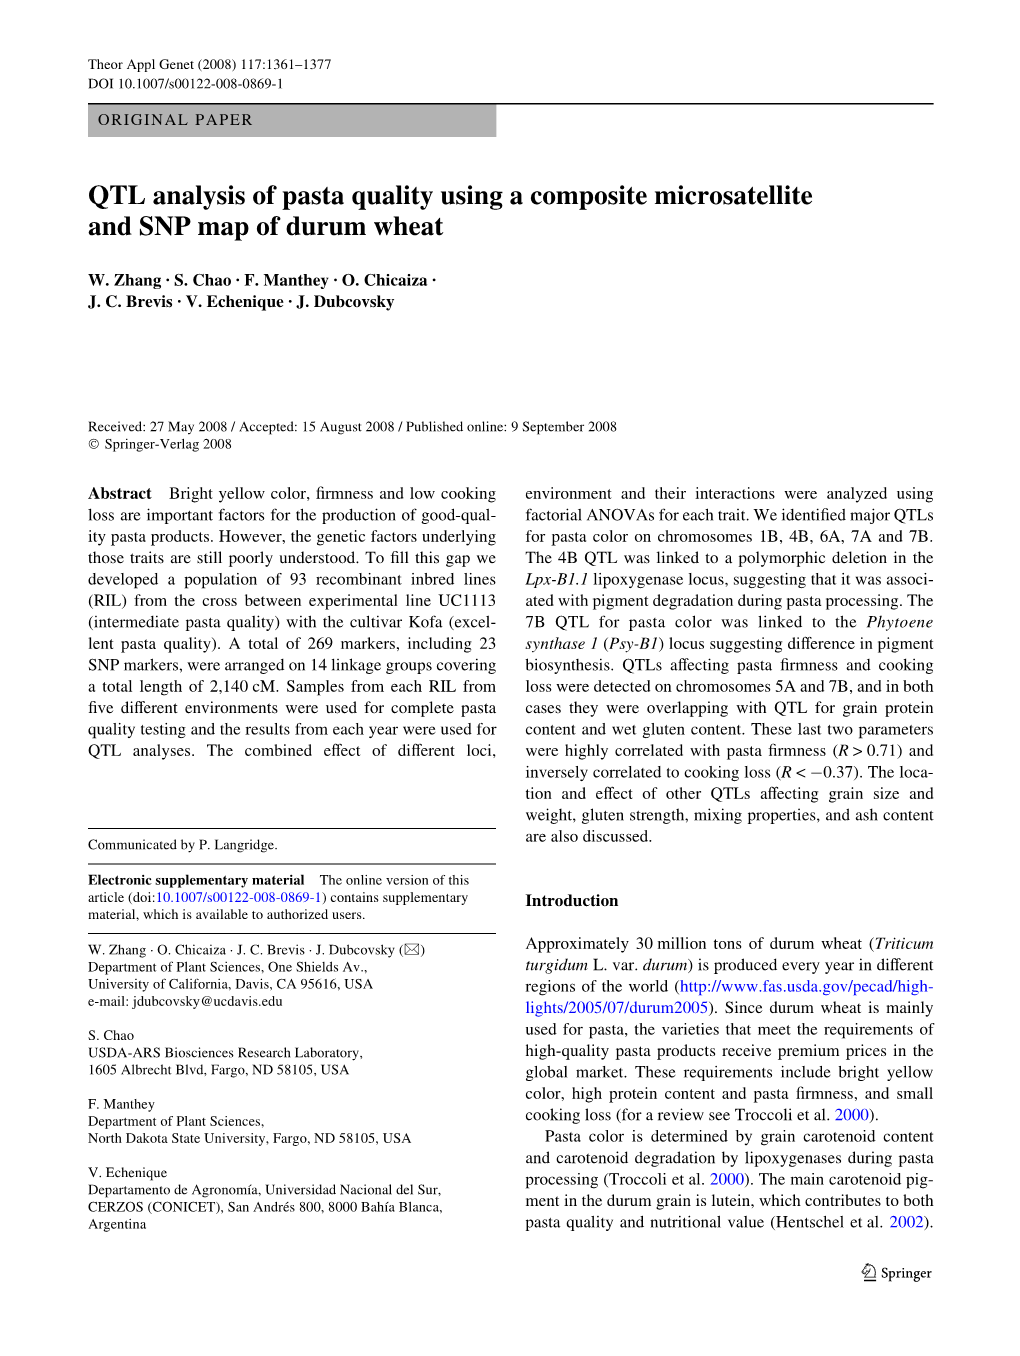 QTL Analysis of Pasta Quality Using a Composite Microsatellite and SNP Map of Durum Wheat